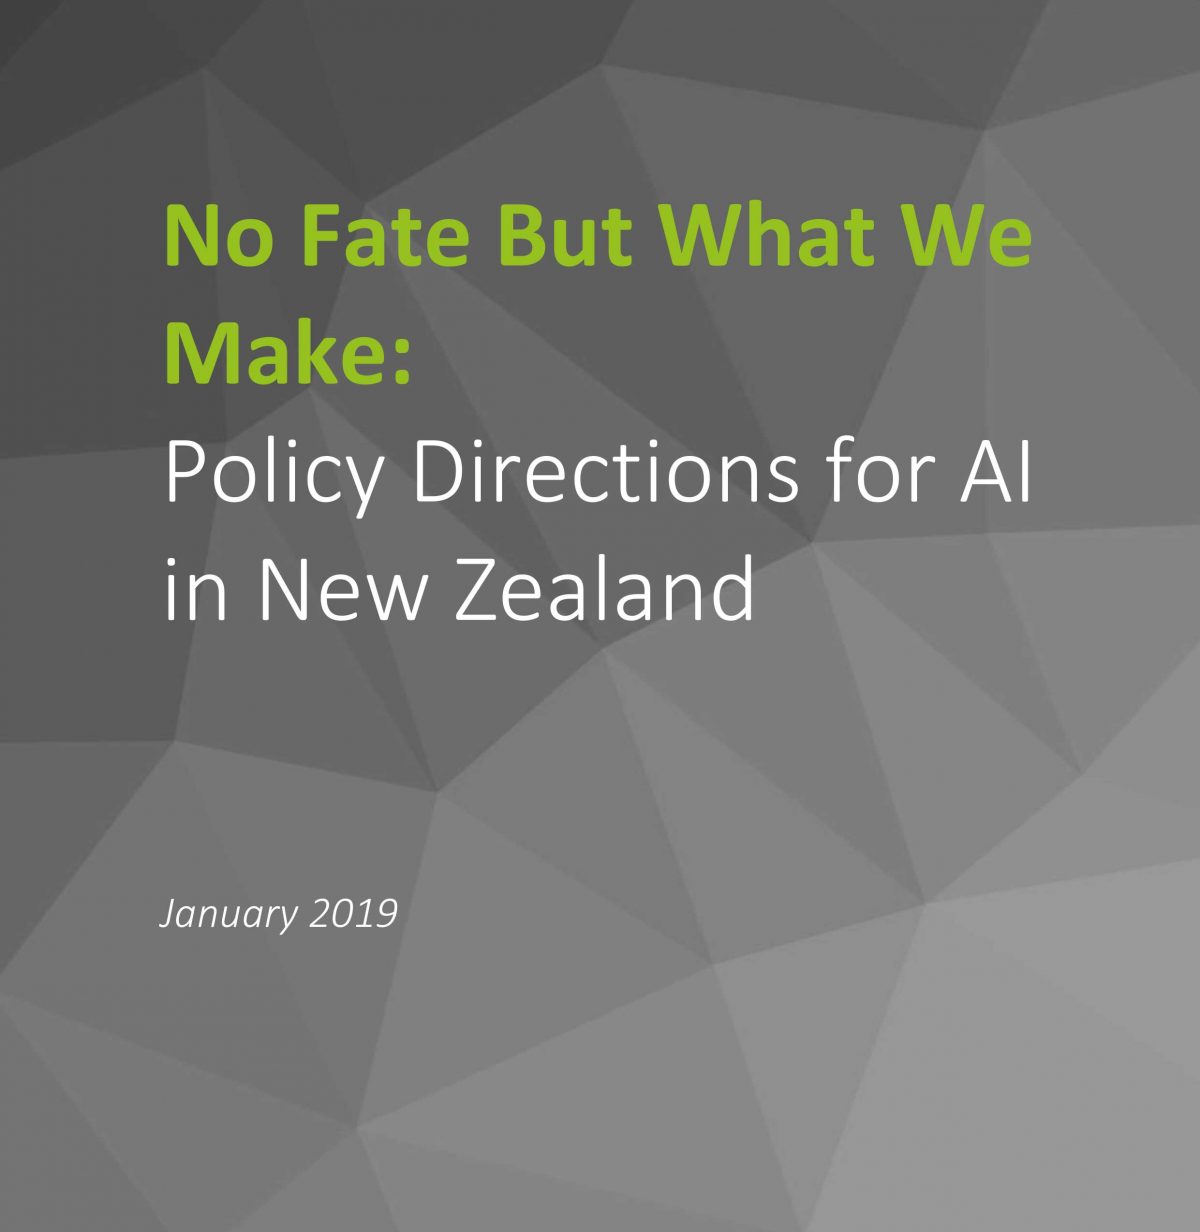 No Fate But What We Make: Policy Directions for AI in New Zealand